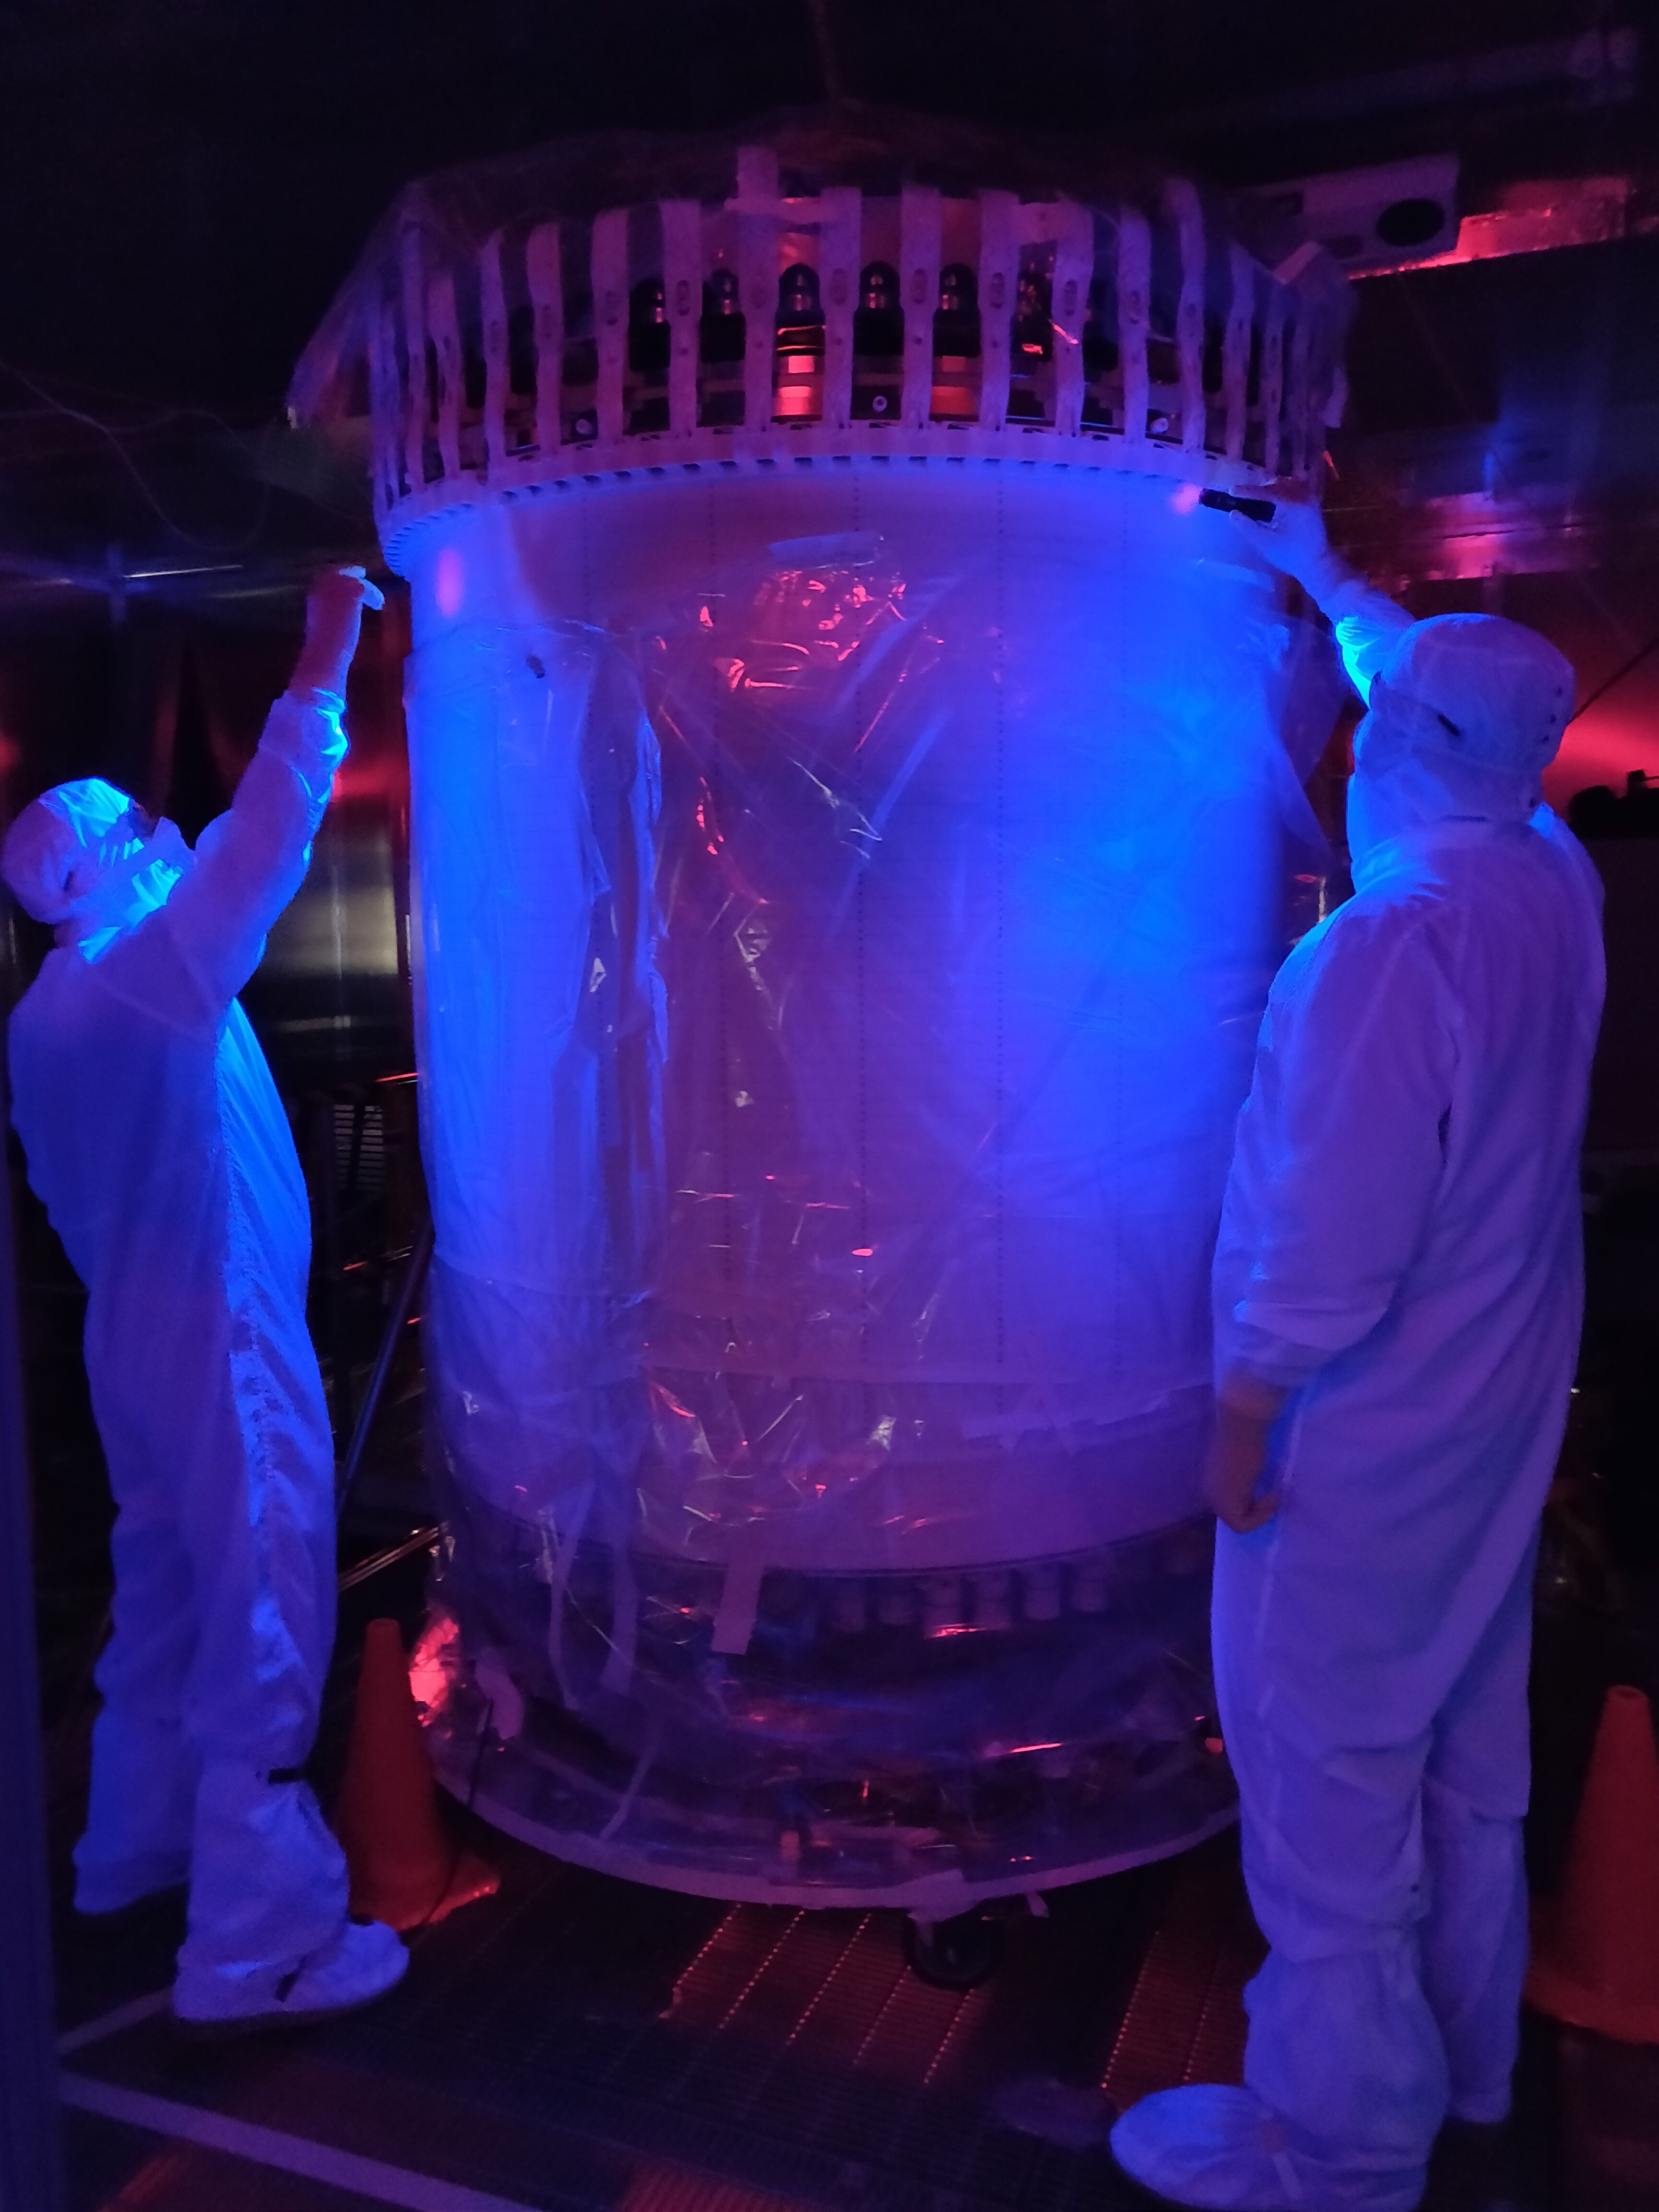 Researchers check for dust on the detector under a black light.